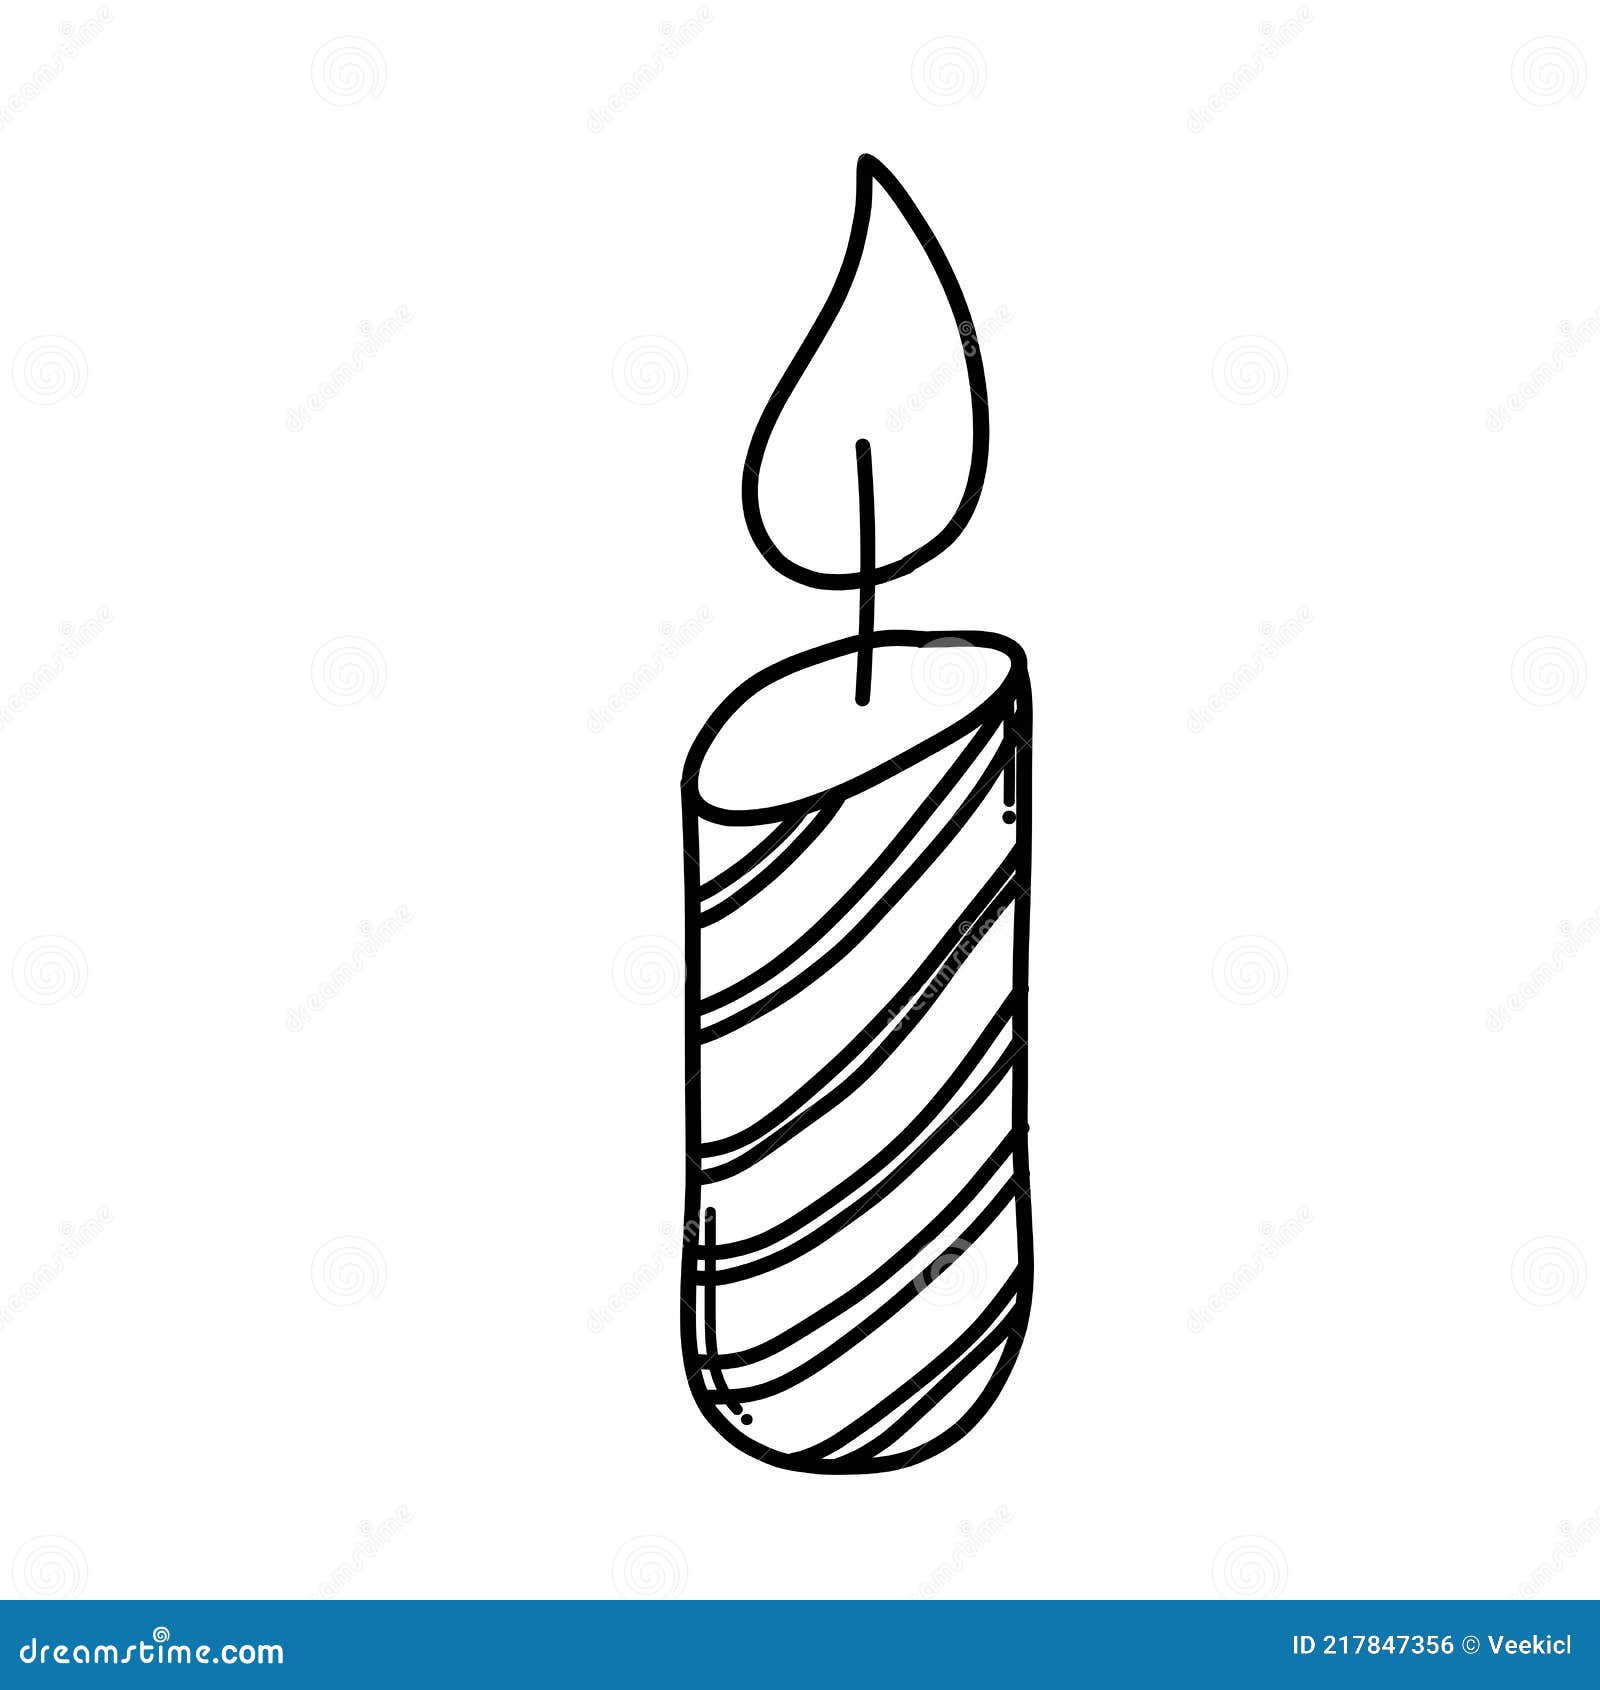 Candle Doodle Vector Icon. Drawing Sketch Illustration Hand Drawn Cartoon  Line Eps10 Stock Vector - Illustration of symbol, line: 217847356